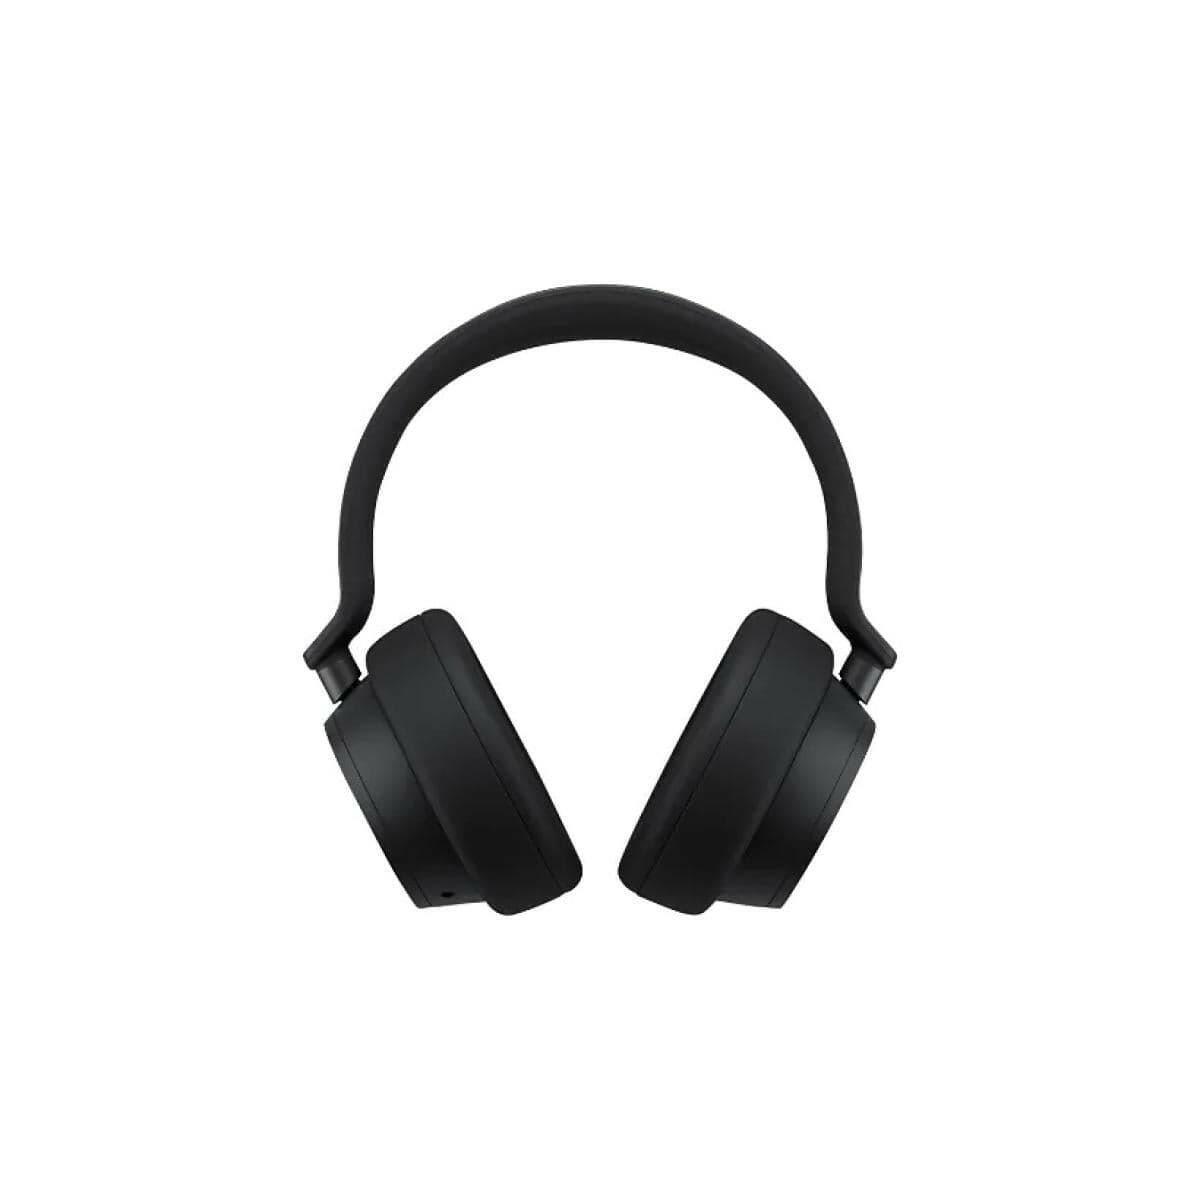 Microsoft Surface surface MICROSOFT SURFACE HEADPHONE 2 | STEREO&NOISE CANCELING